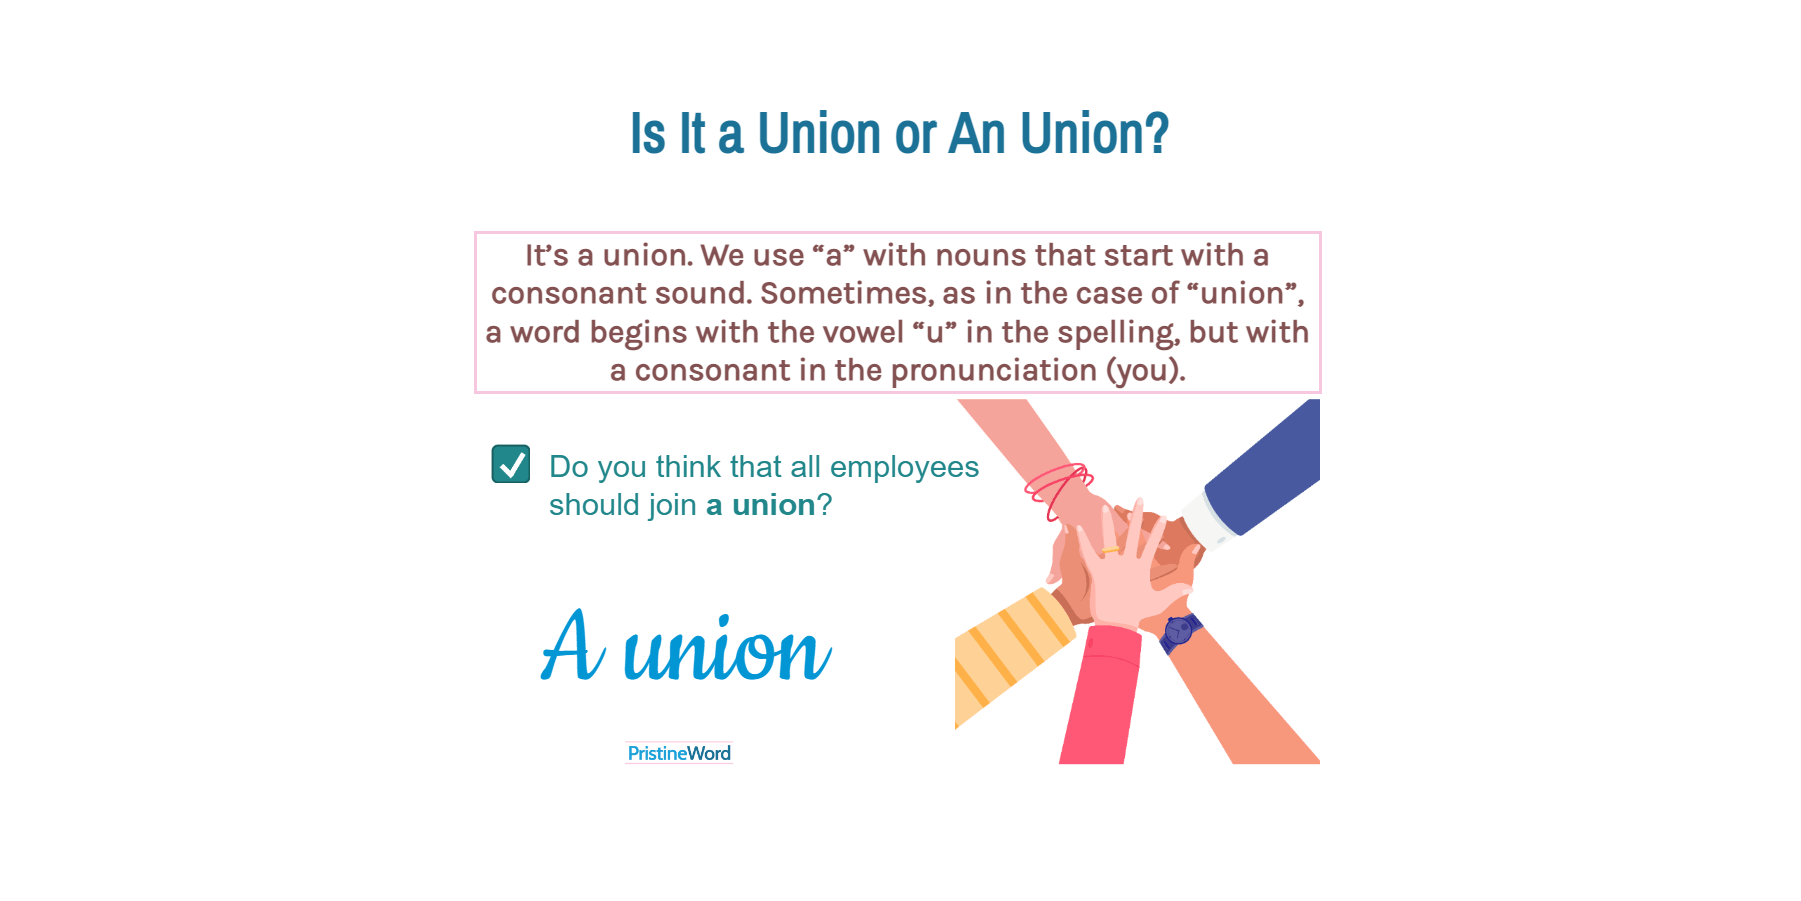 Is It a Union or an Union?